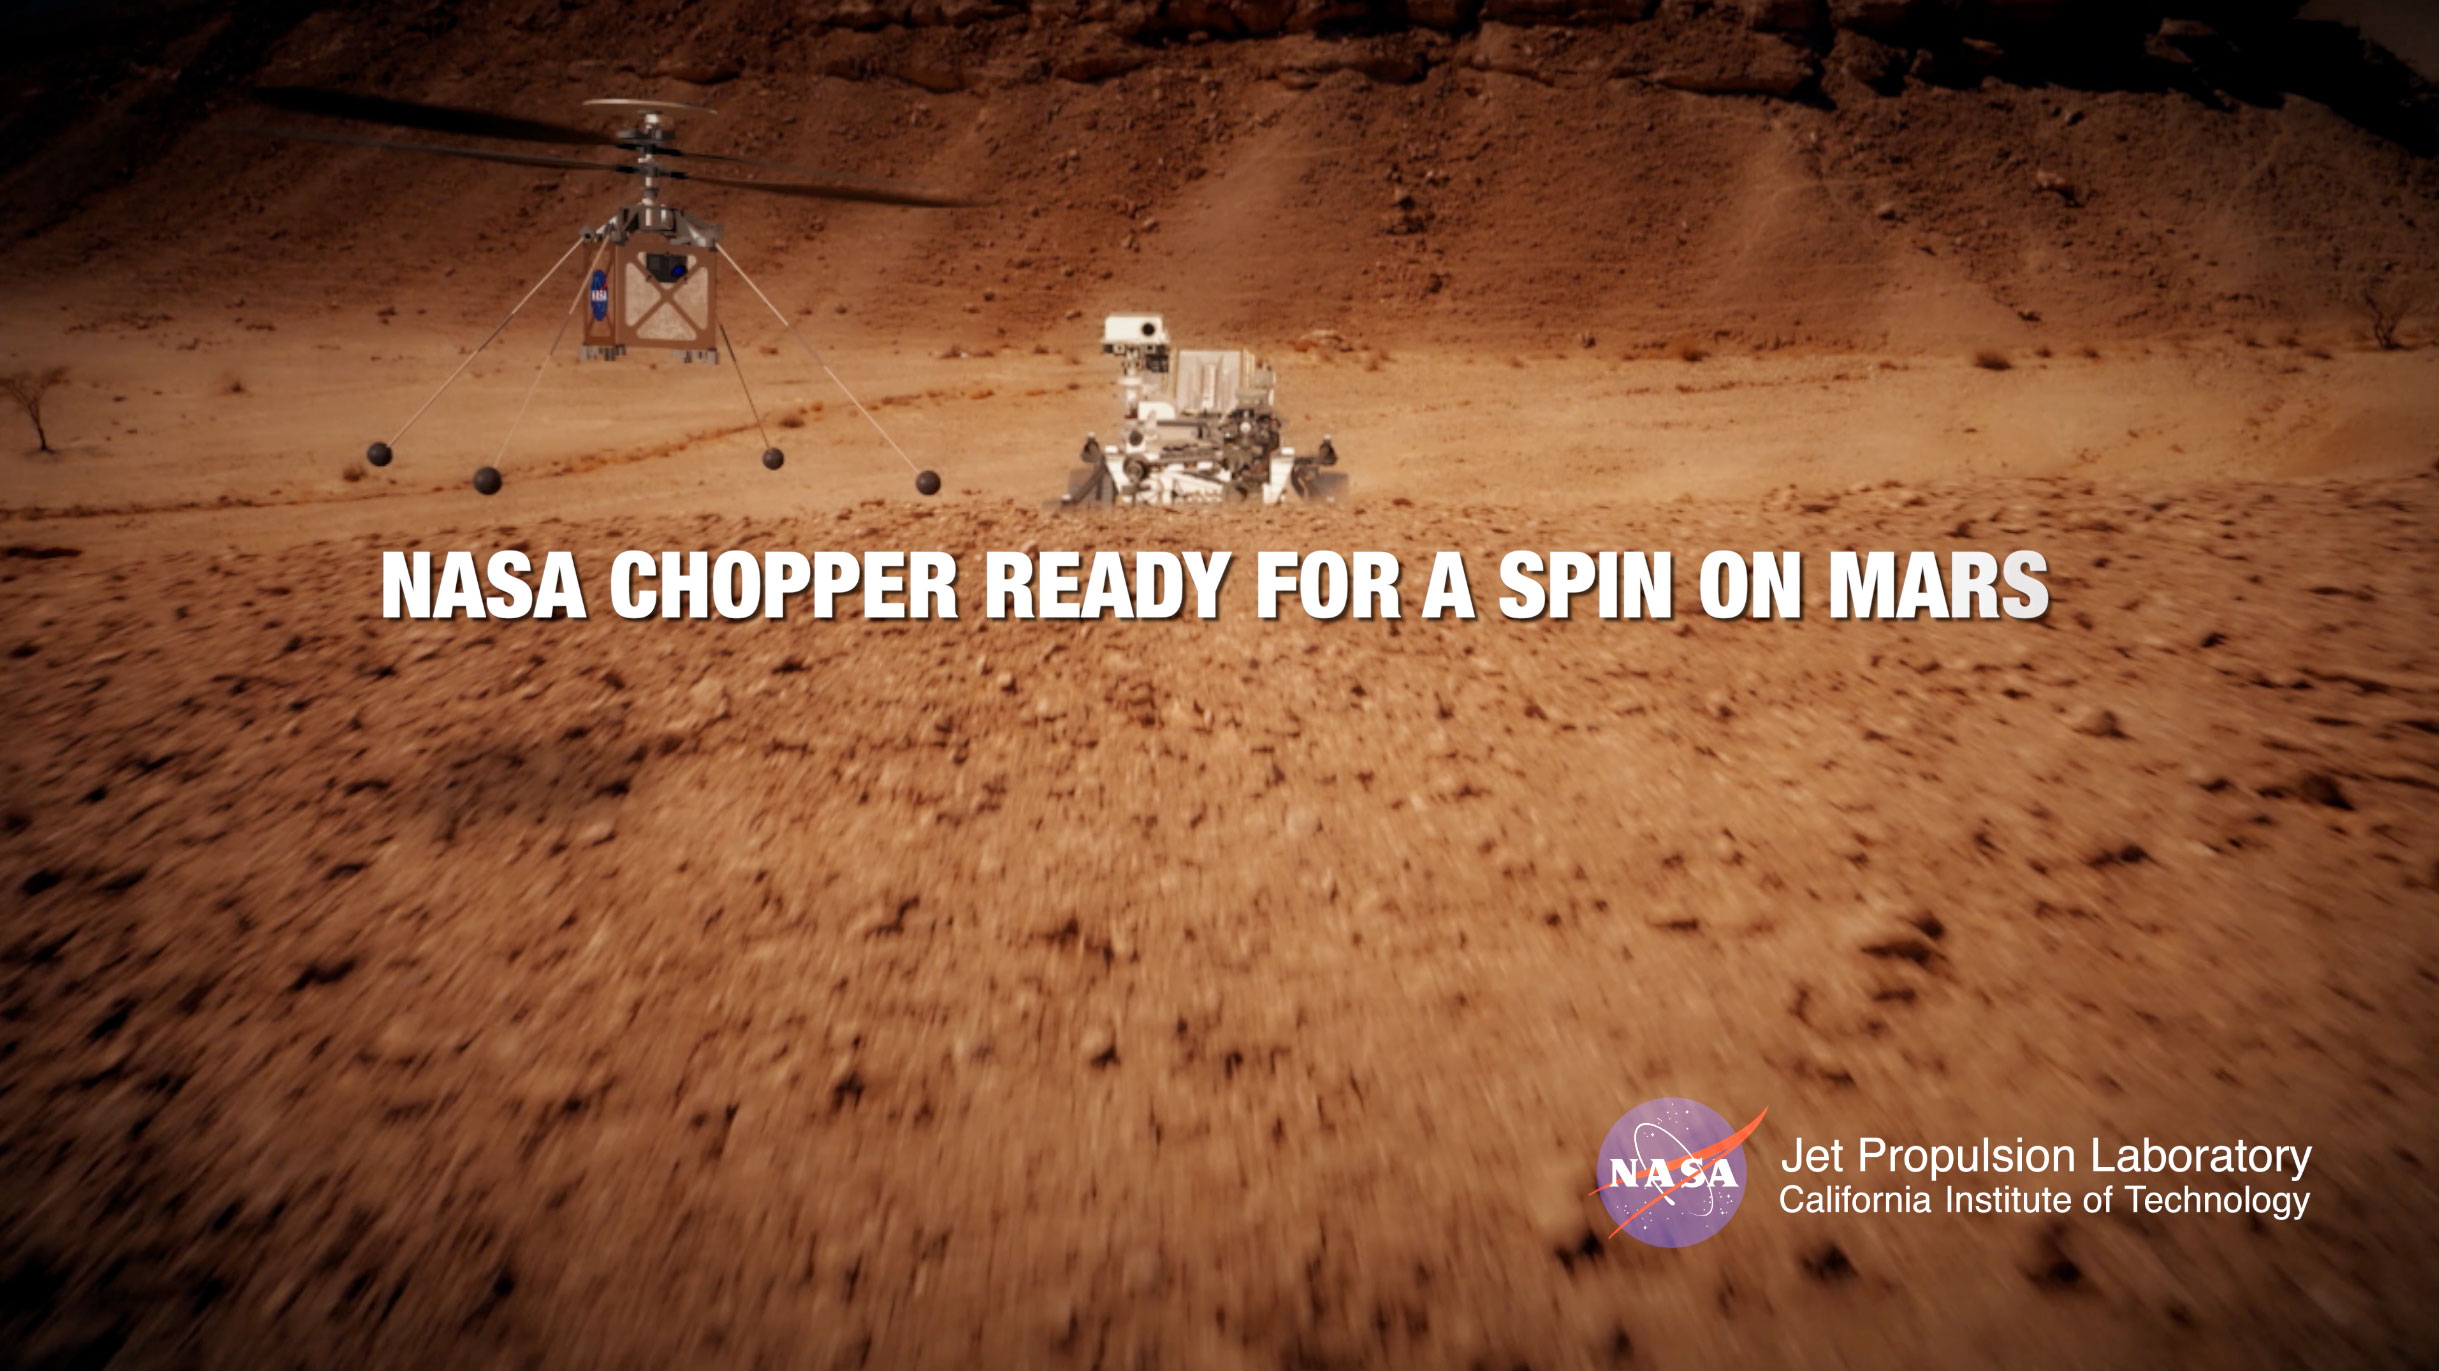 Watch video for NASA Chopper Ready for a Spin on Mars